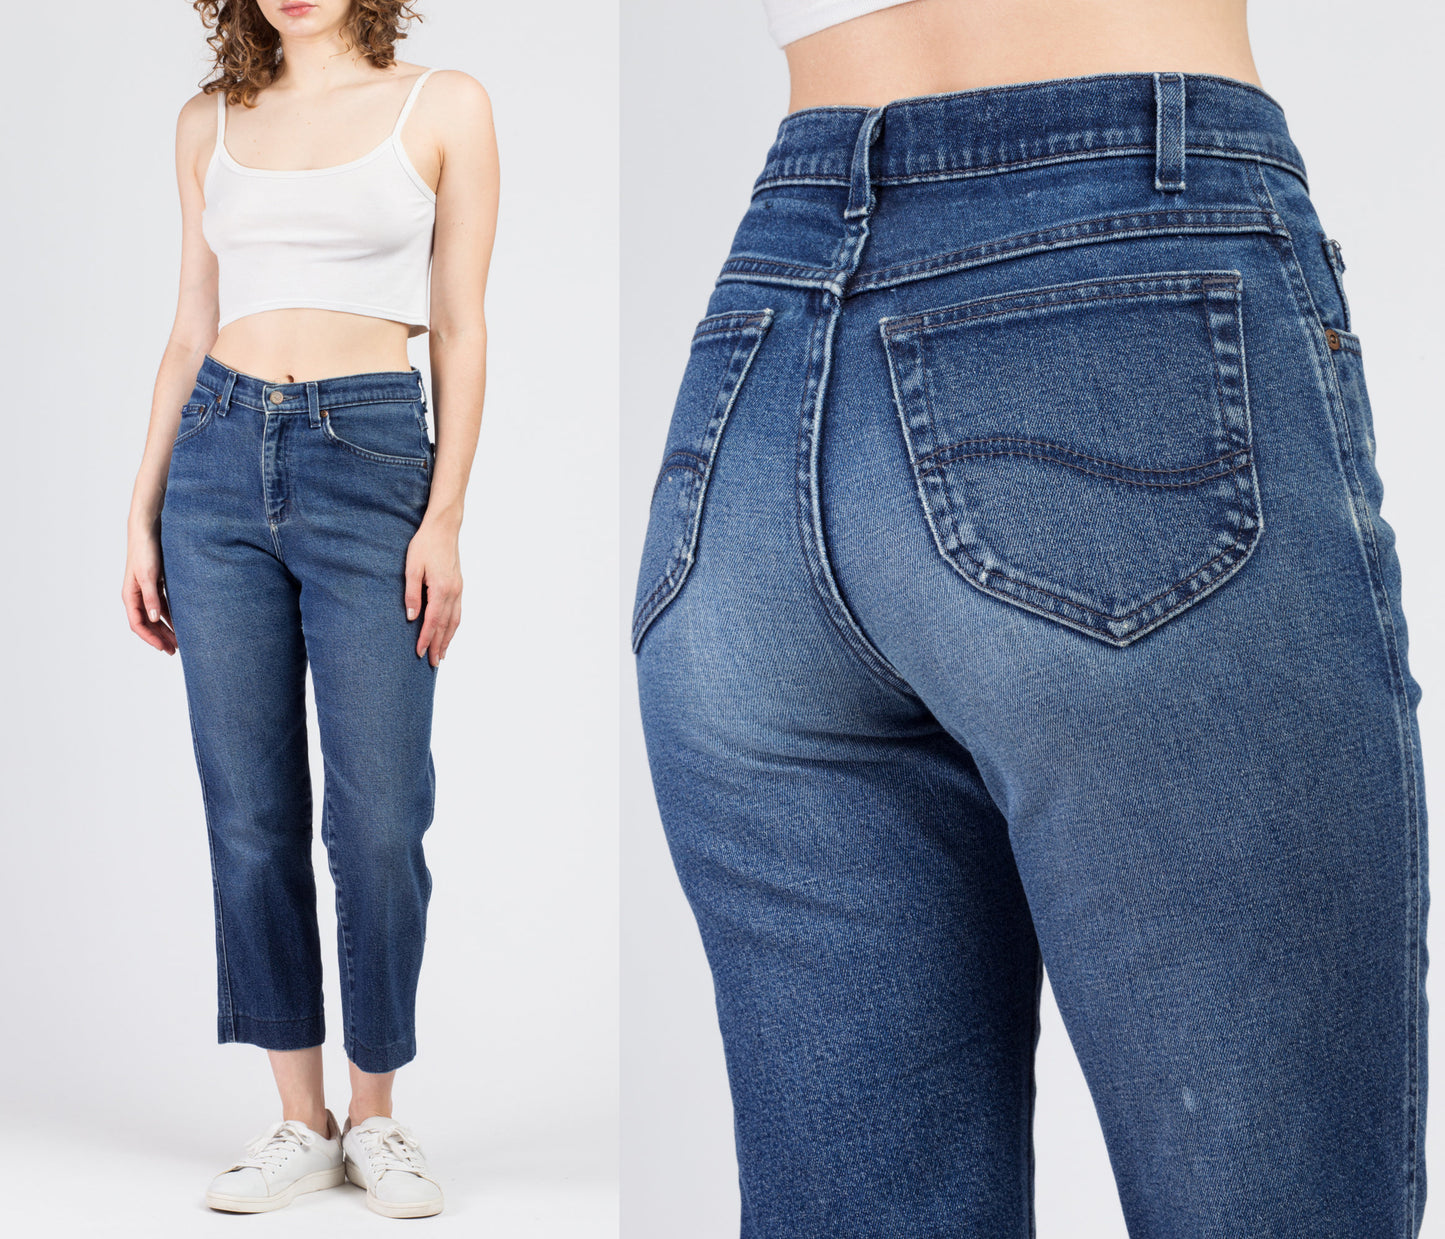 Vintage High Waisted Lee Jeans - Small to Medium